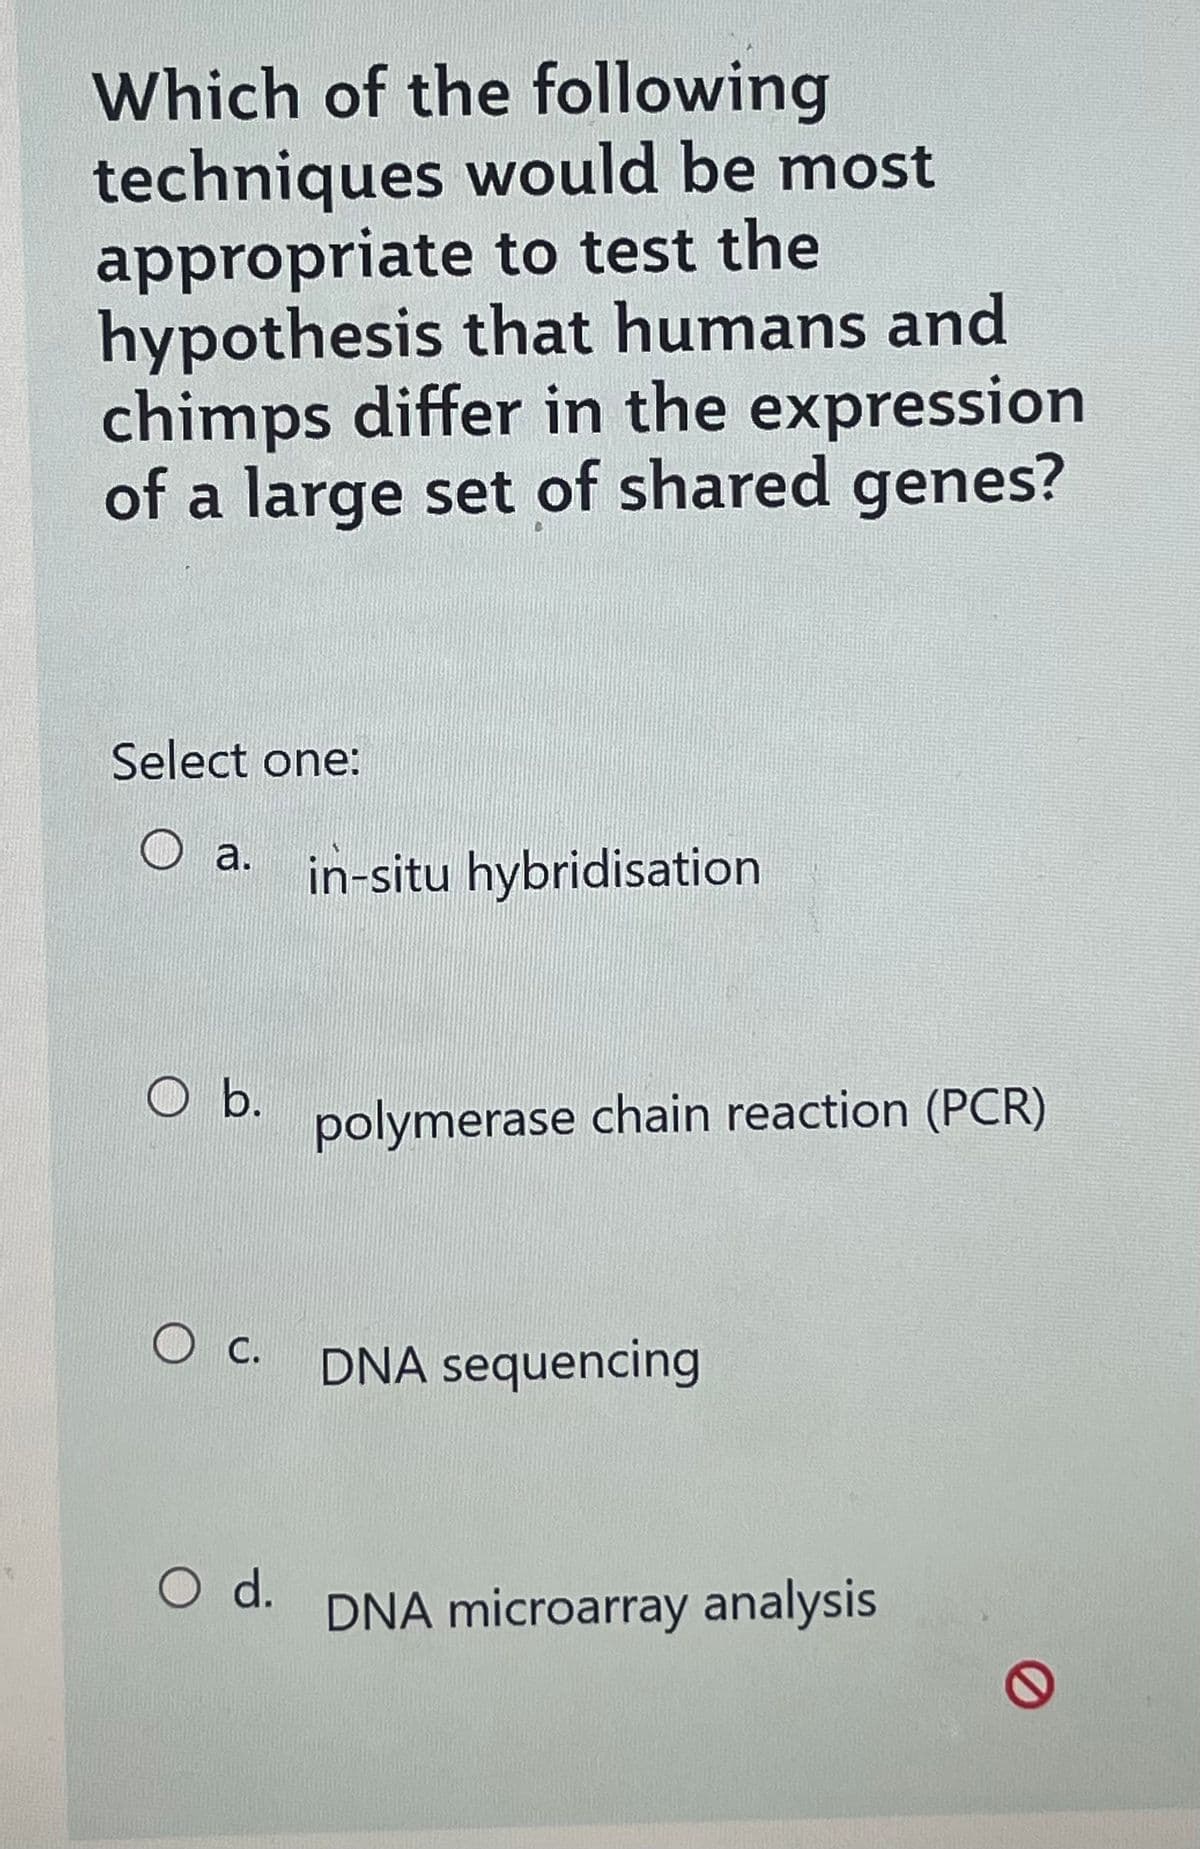 Which of the following
techniques would be most
appropriate to test the
hypothesis that humans and
chimps differ in the expression
of a large set of shared genes?
Select one:
a.
O b.
O c.
O d.
in-situ hybridisation
polymerase chain reaction (PCR)
DNA sequencing
DNA microarray analysis
0